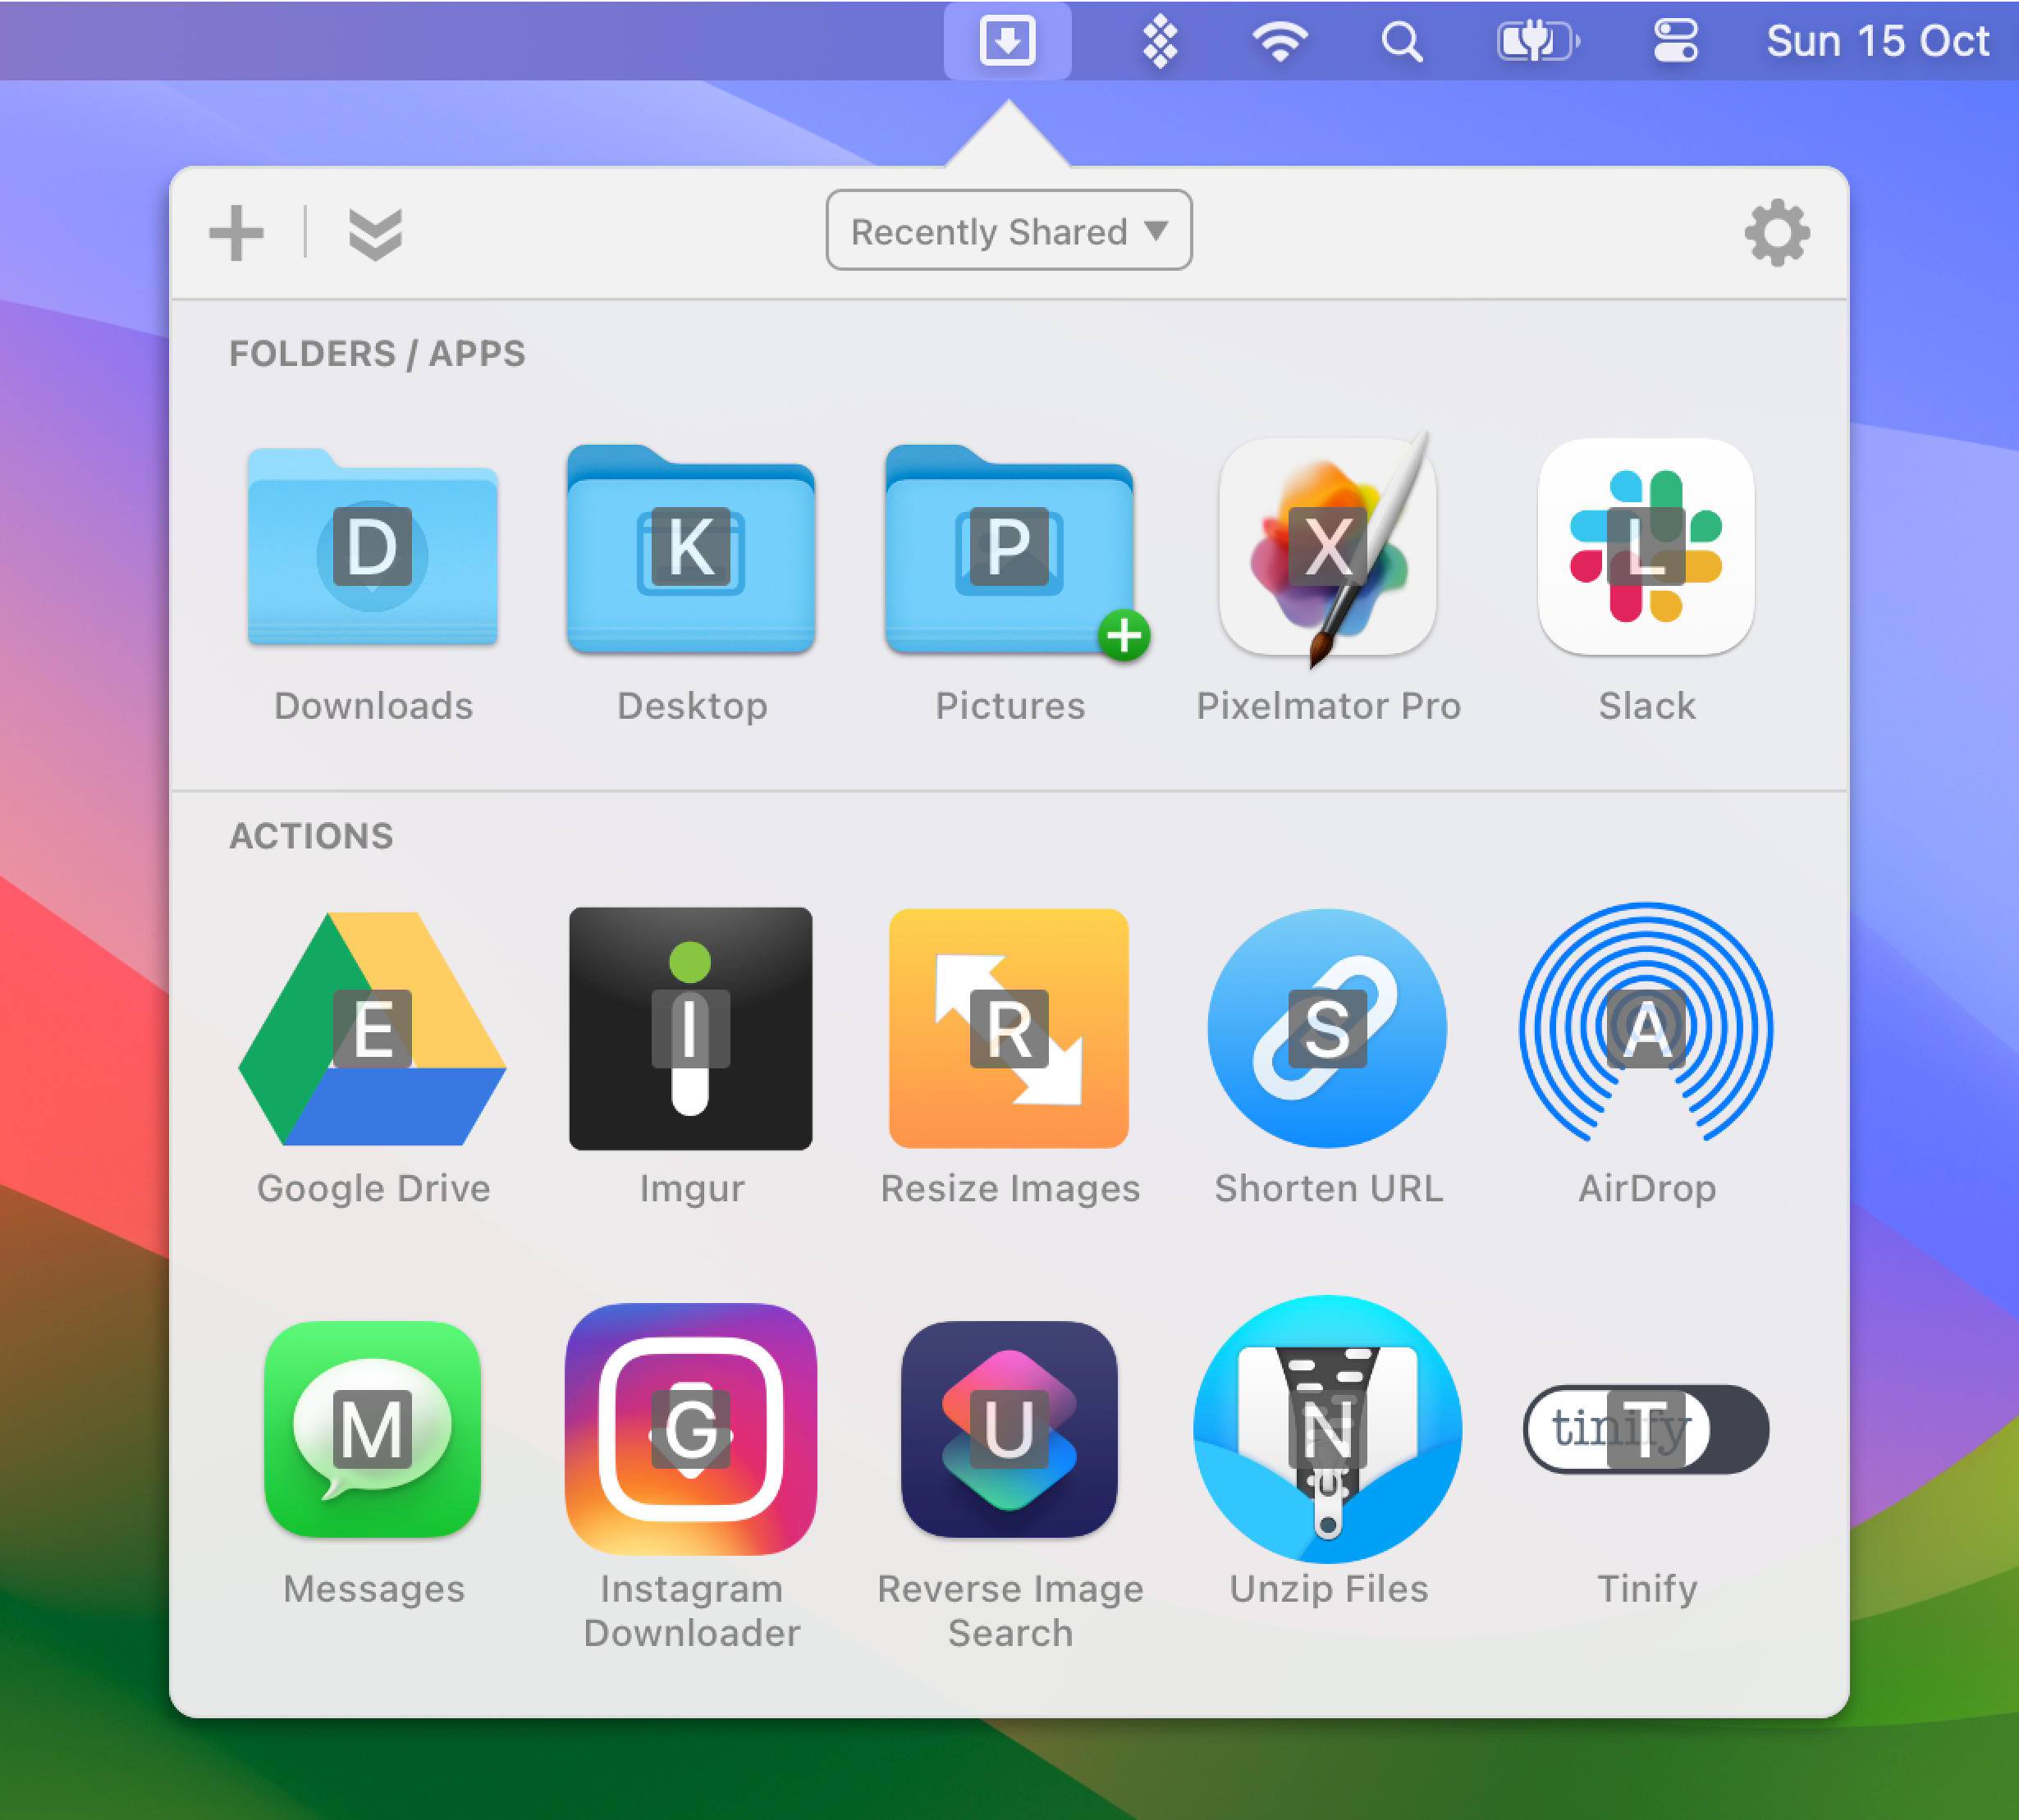 Dropzone opens and shows the shortcut key overlaid on each icon